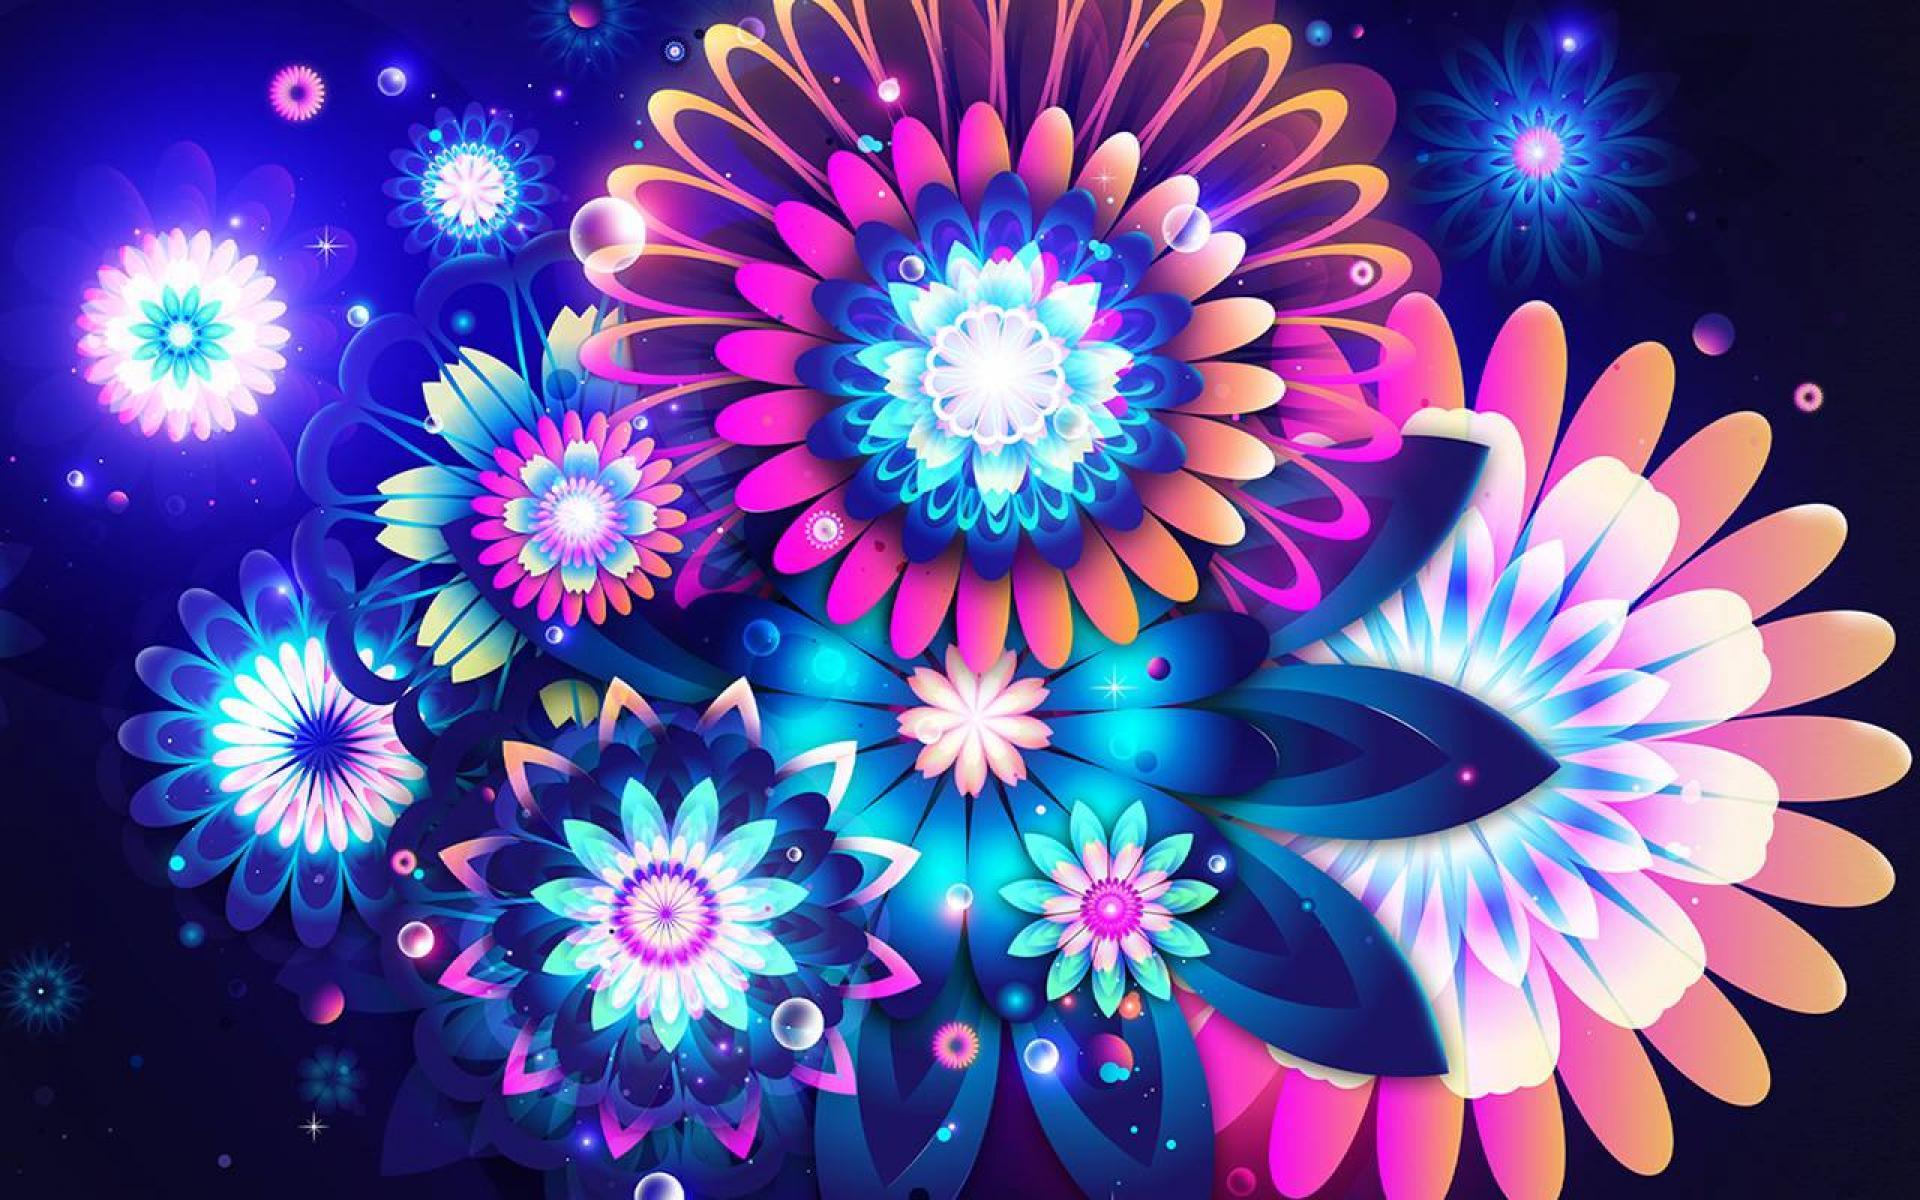 Colorful Background Designs Image Design, Awesome